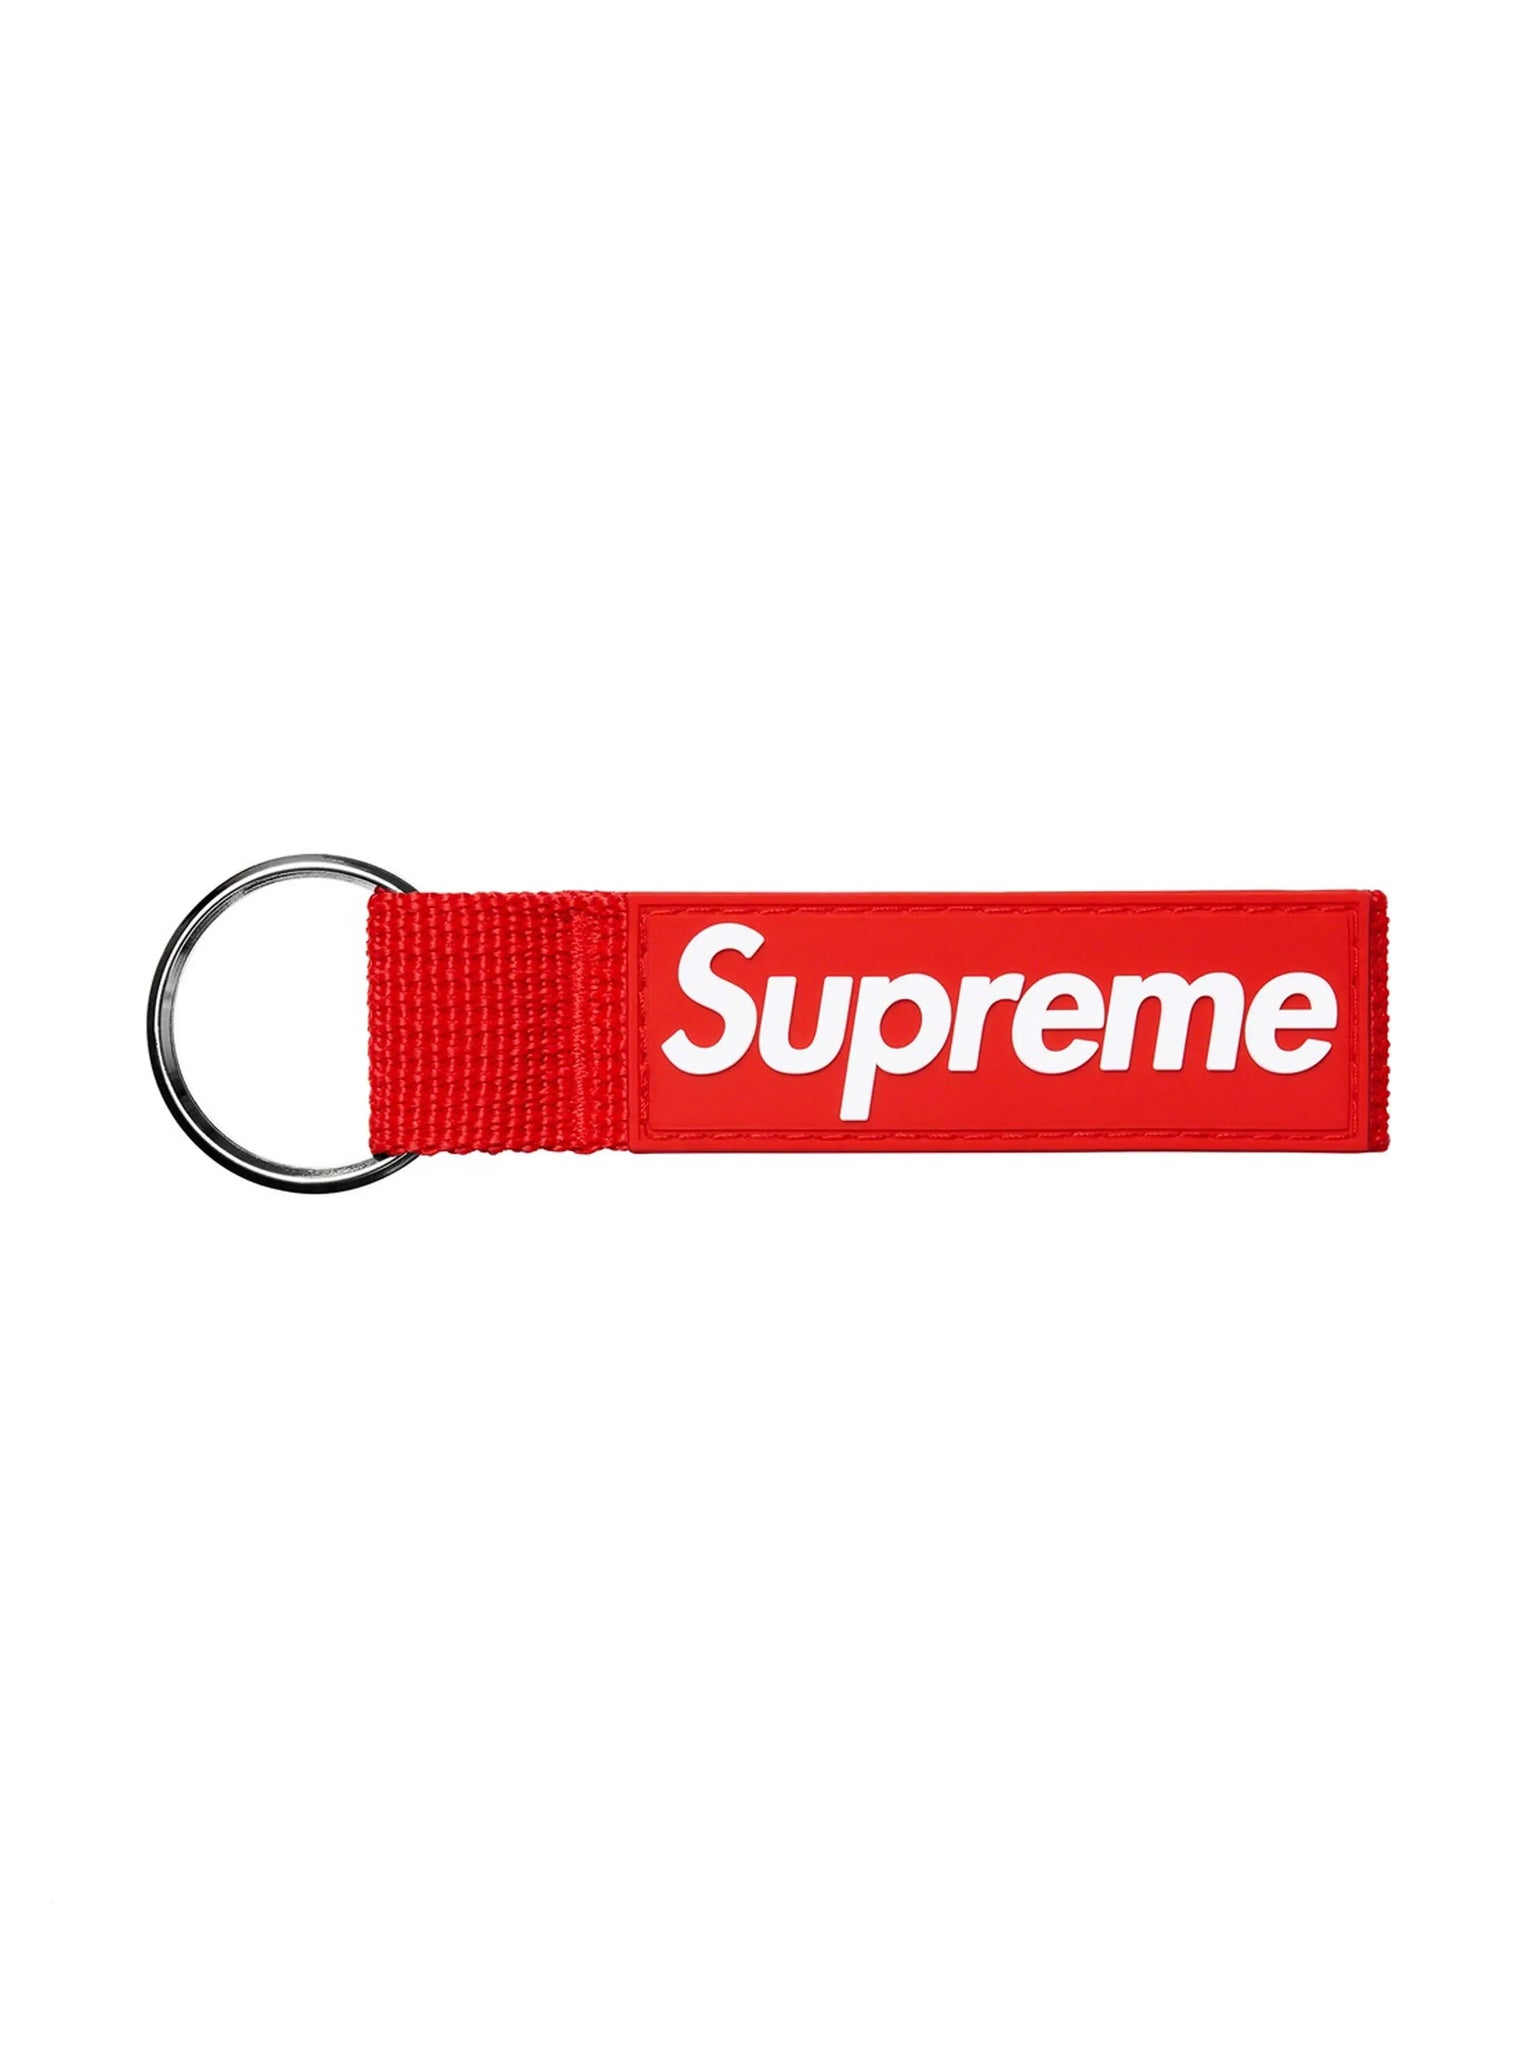 Supreme Webbing Keychain Red in Auckland, New Zealand - Shop name